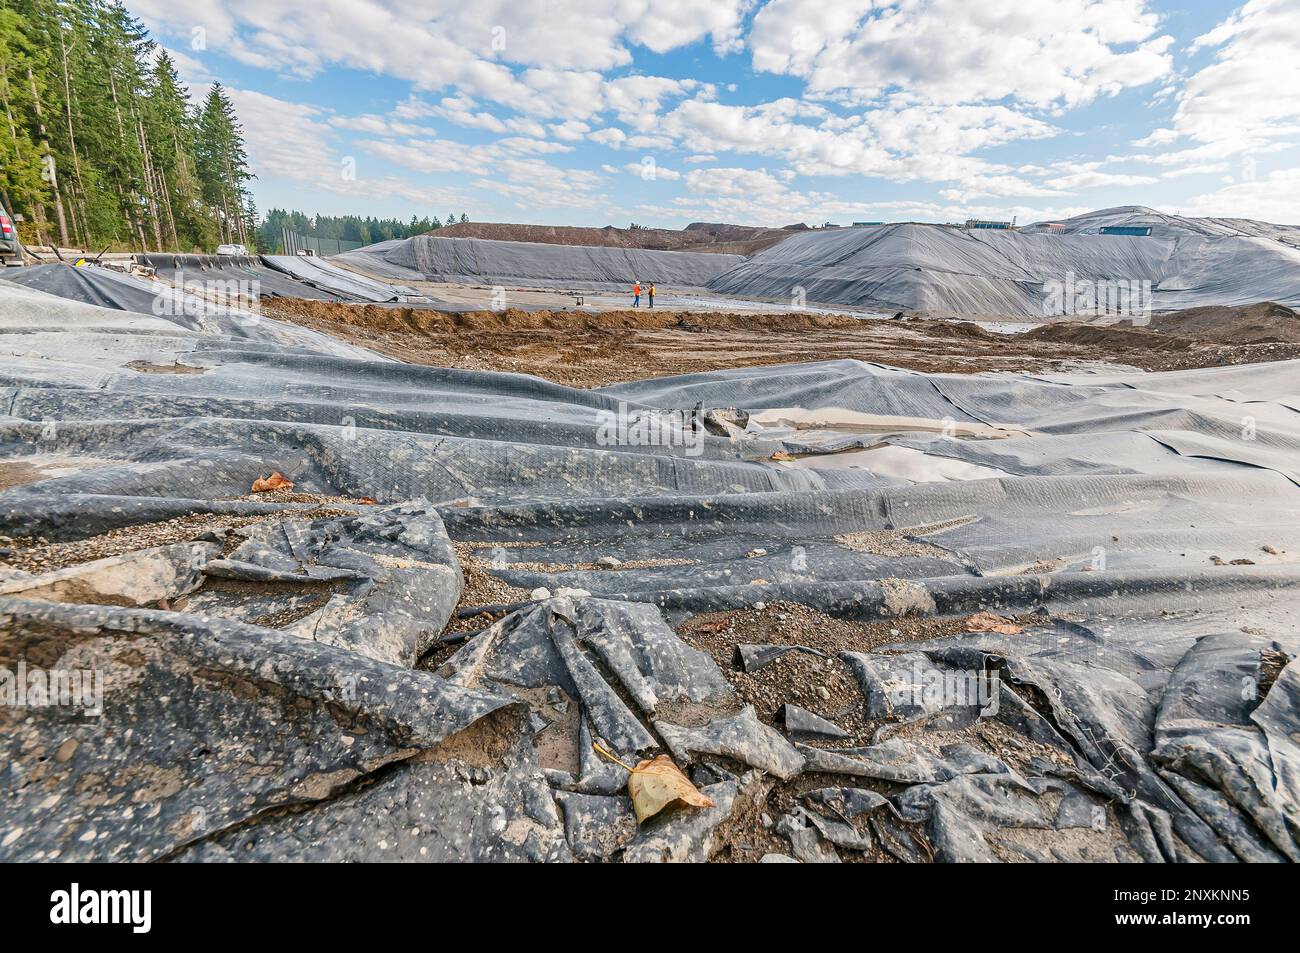 Vast areas of excavation and plastic geomembrane coverings at an active landfill. Stock Photo